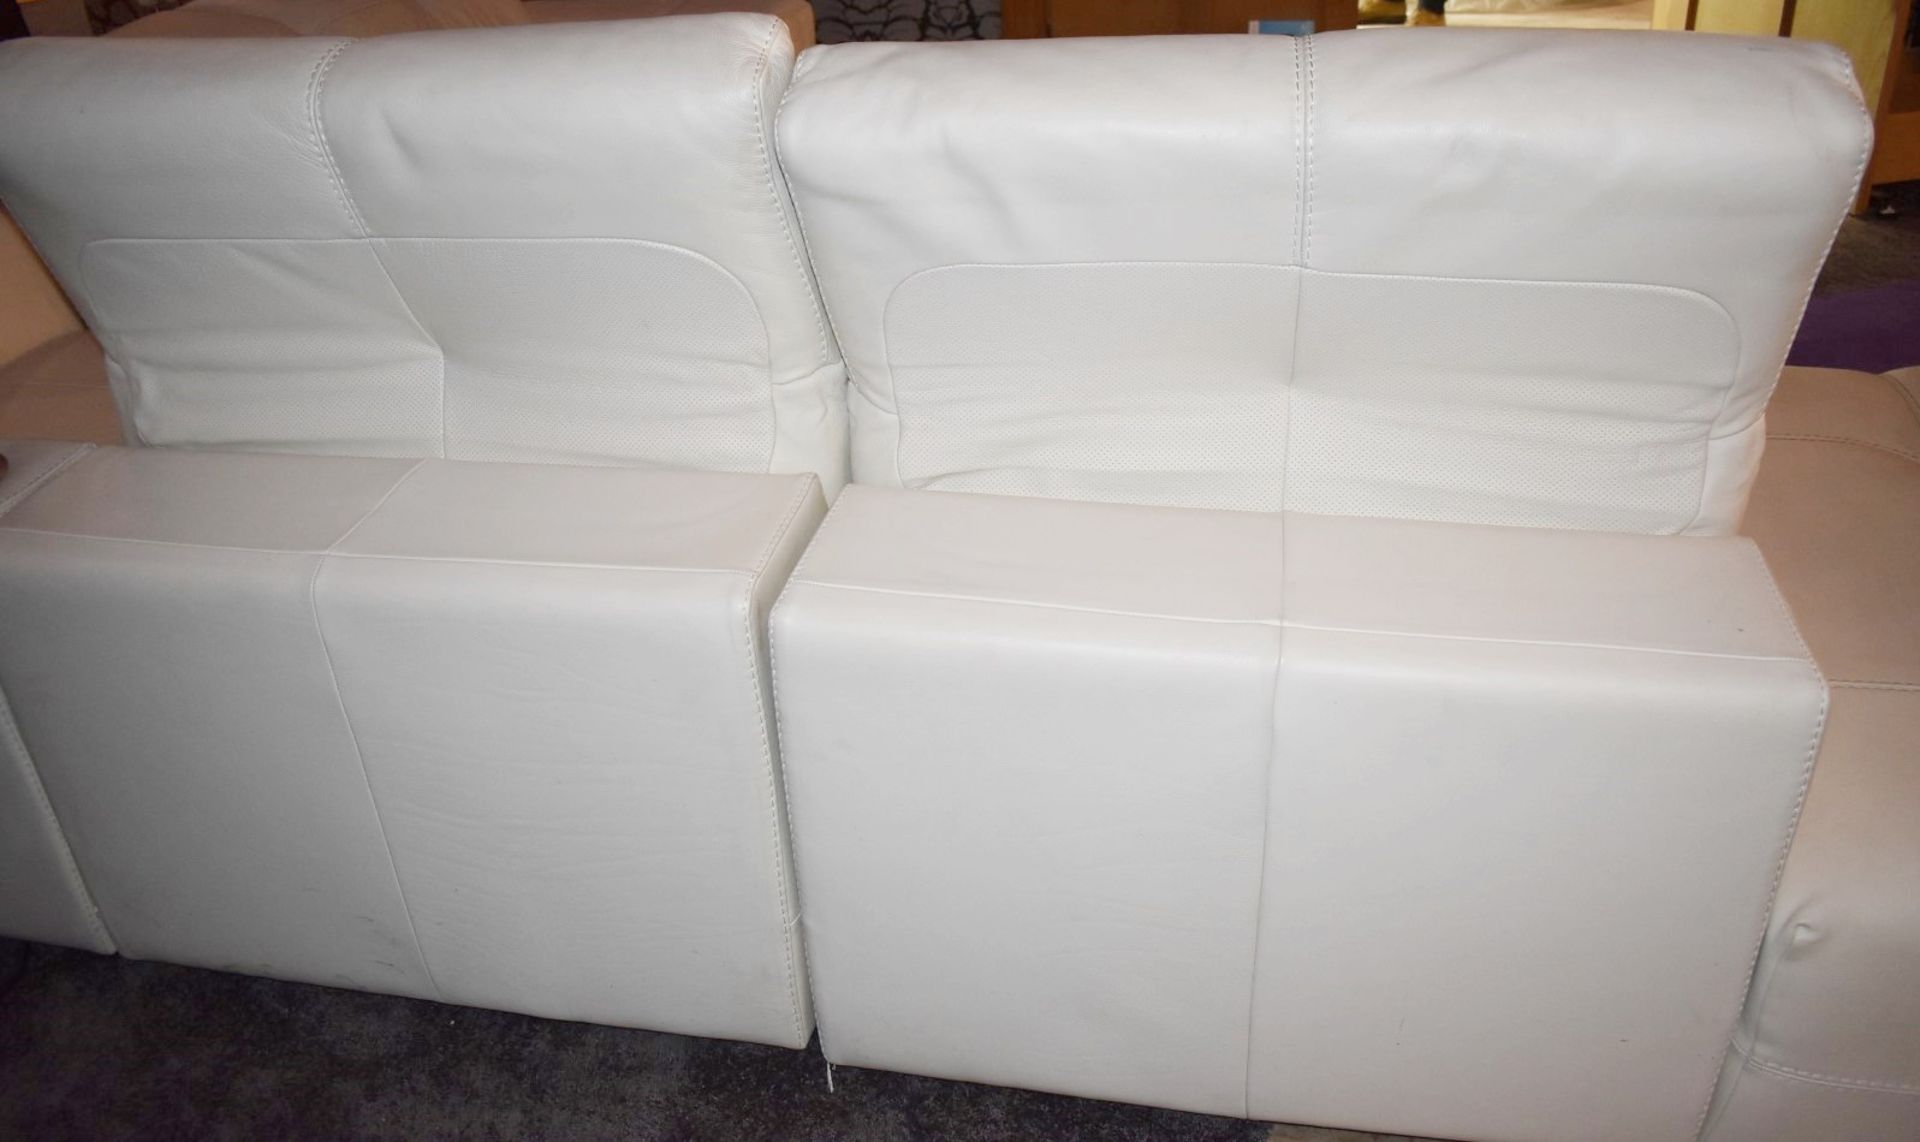 1 x NATUZZI Luxury White Leather Corner Sofa With Integrated Stereo Speakers And iPhone Dock - Cream - Image 10 of 13